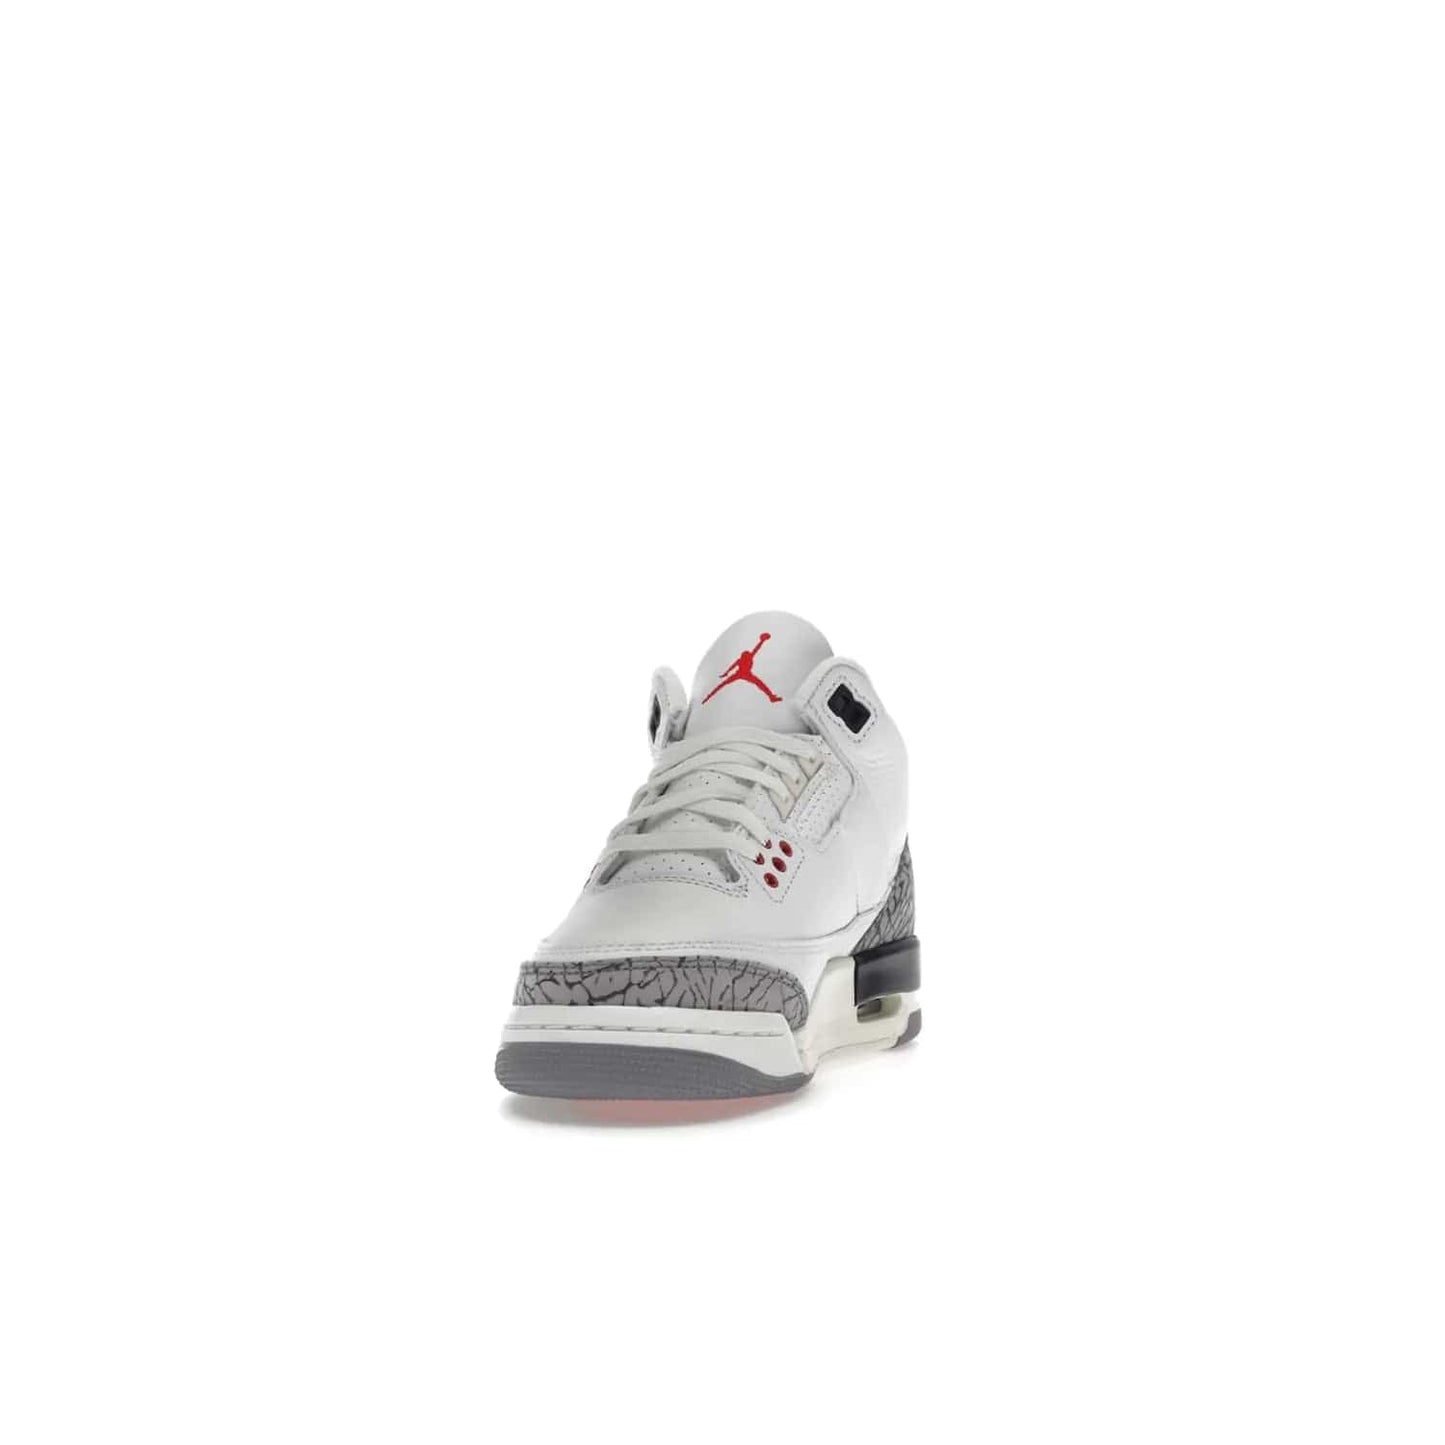 Jordan 3 Retro White Cement Reimagined (GS) - Image 12 - Only at www.BallersClubKickz.com - Grab the perfect blend of modern design and classic style with the Jordan 3 Retro White Cement Reimagined (GS). Features Summit White, Fire Red, Black, and Cement Grey colorway, iconic Jordan logo embroidered on the tongue, and “Nike Air” branding. Limited availability, get your pair before March 11th 2023.